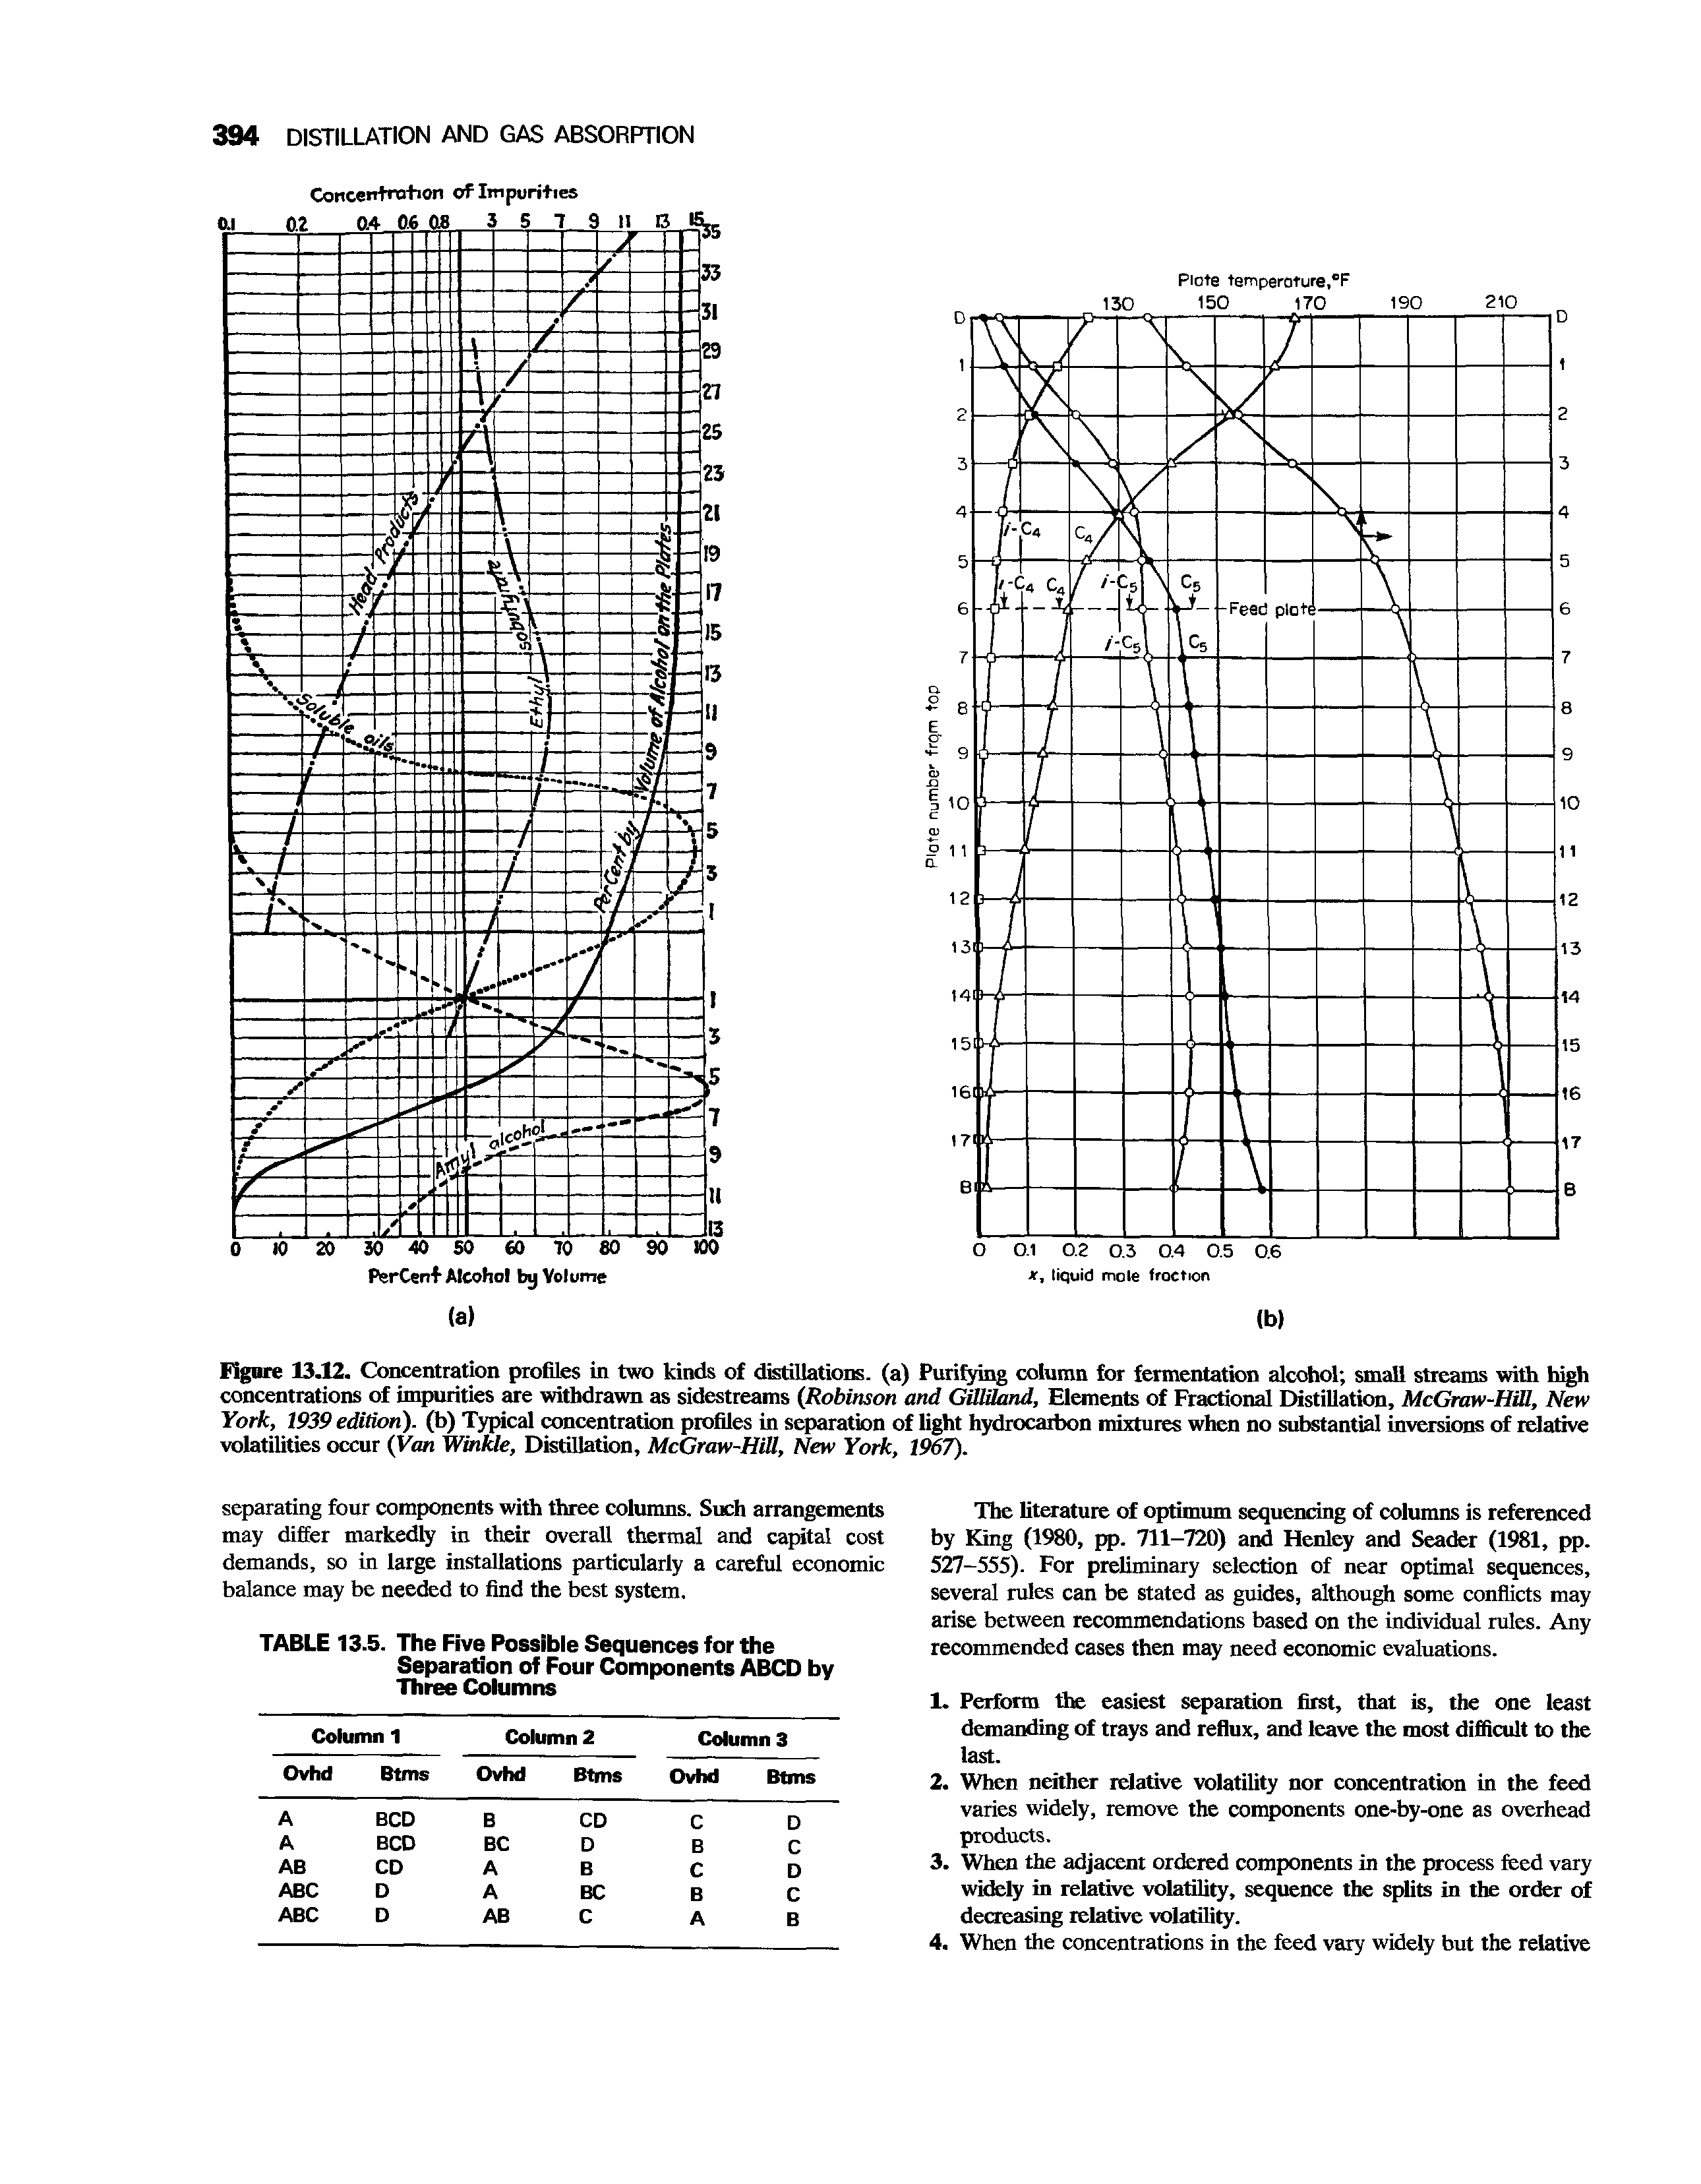 Figure 13.12. Concentration profiles in two kinds of distillations, (a) Purifying column for fermentation alcohol small streams with high concentrations of impurities are withdrawn as sidestreams (Robinson and Gilliland, Elements of Fractional Distillation, McGraw-Hill, New York, 1939 edition), (b) Typical concentration profiles in separation of light hydrocarbon mixtures when no substantial inversions of relative volatilities occur (Van Winkle, Distillation, McGraw-Hill, New York, 1967).